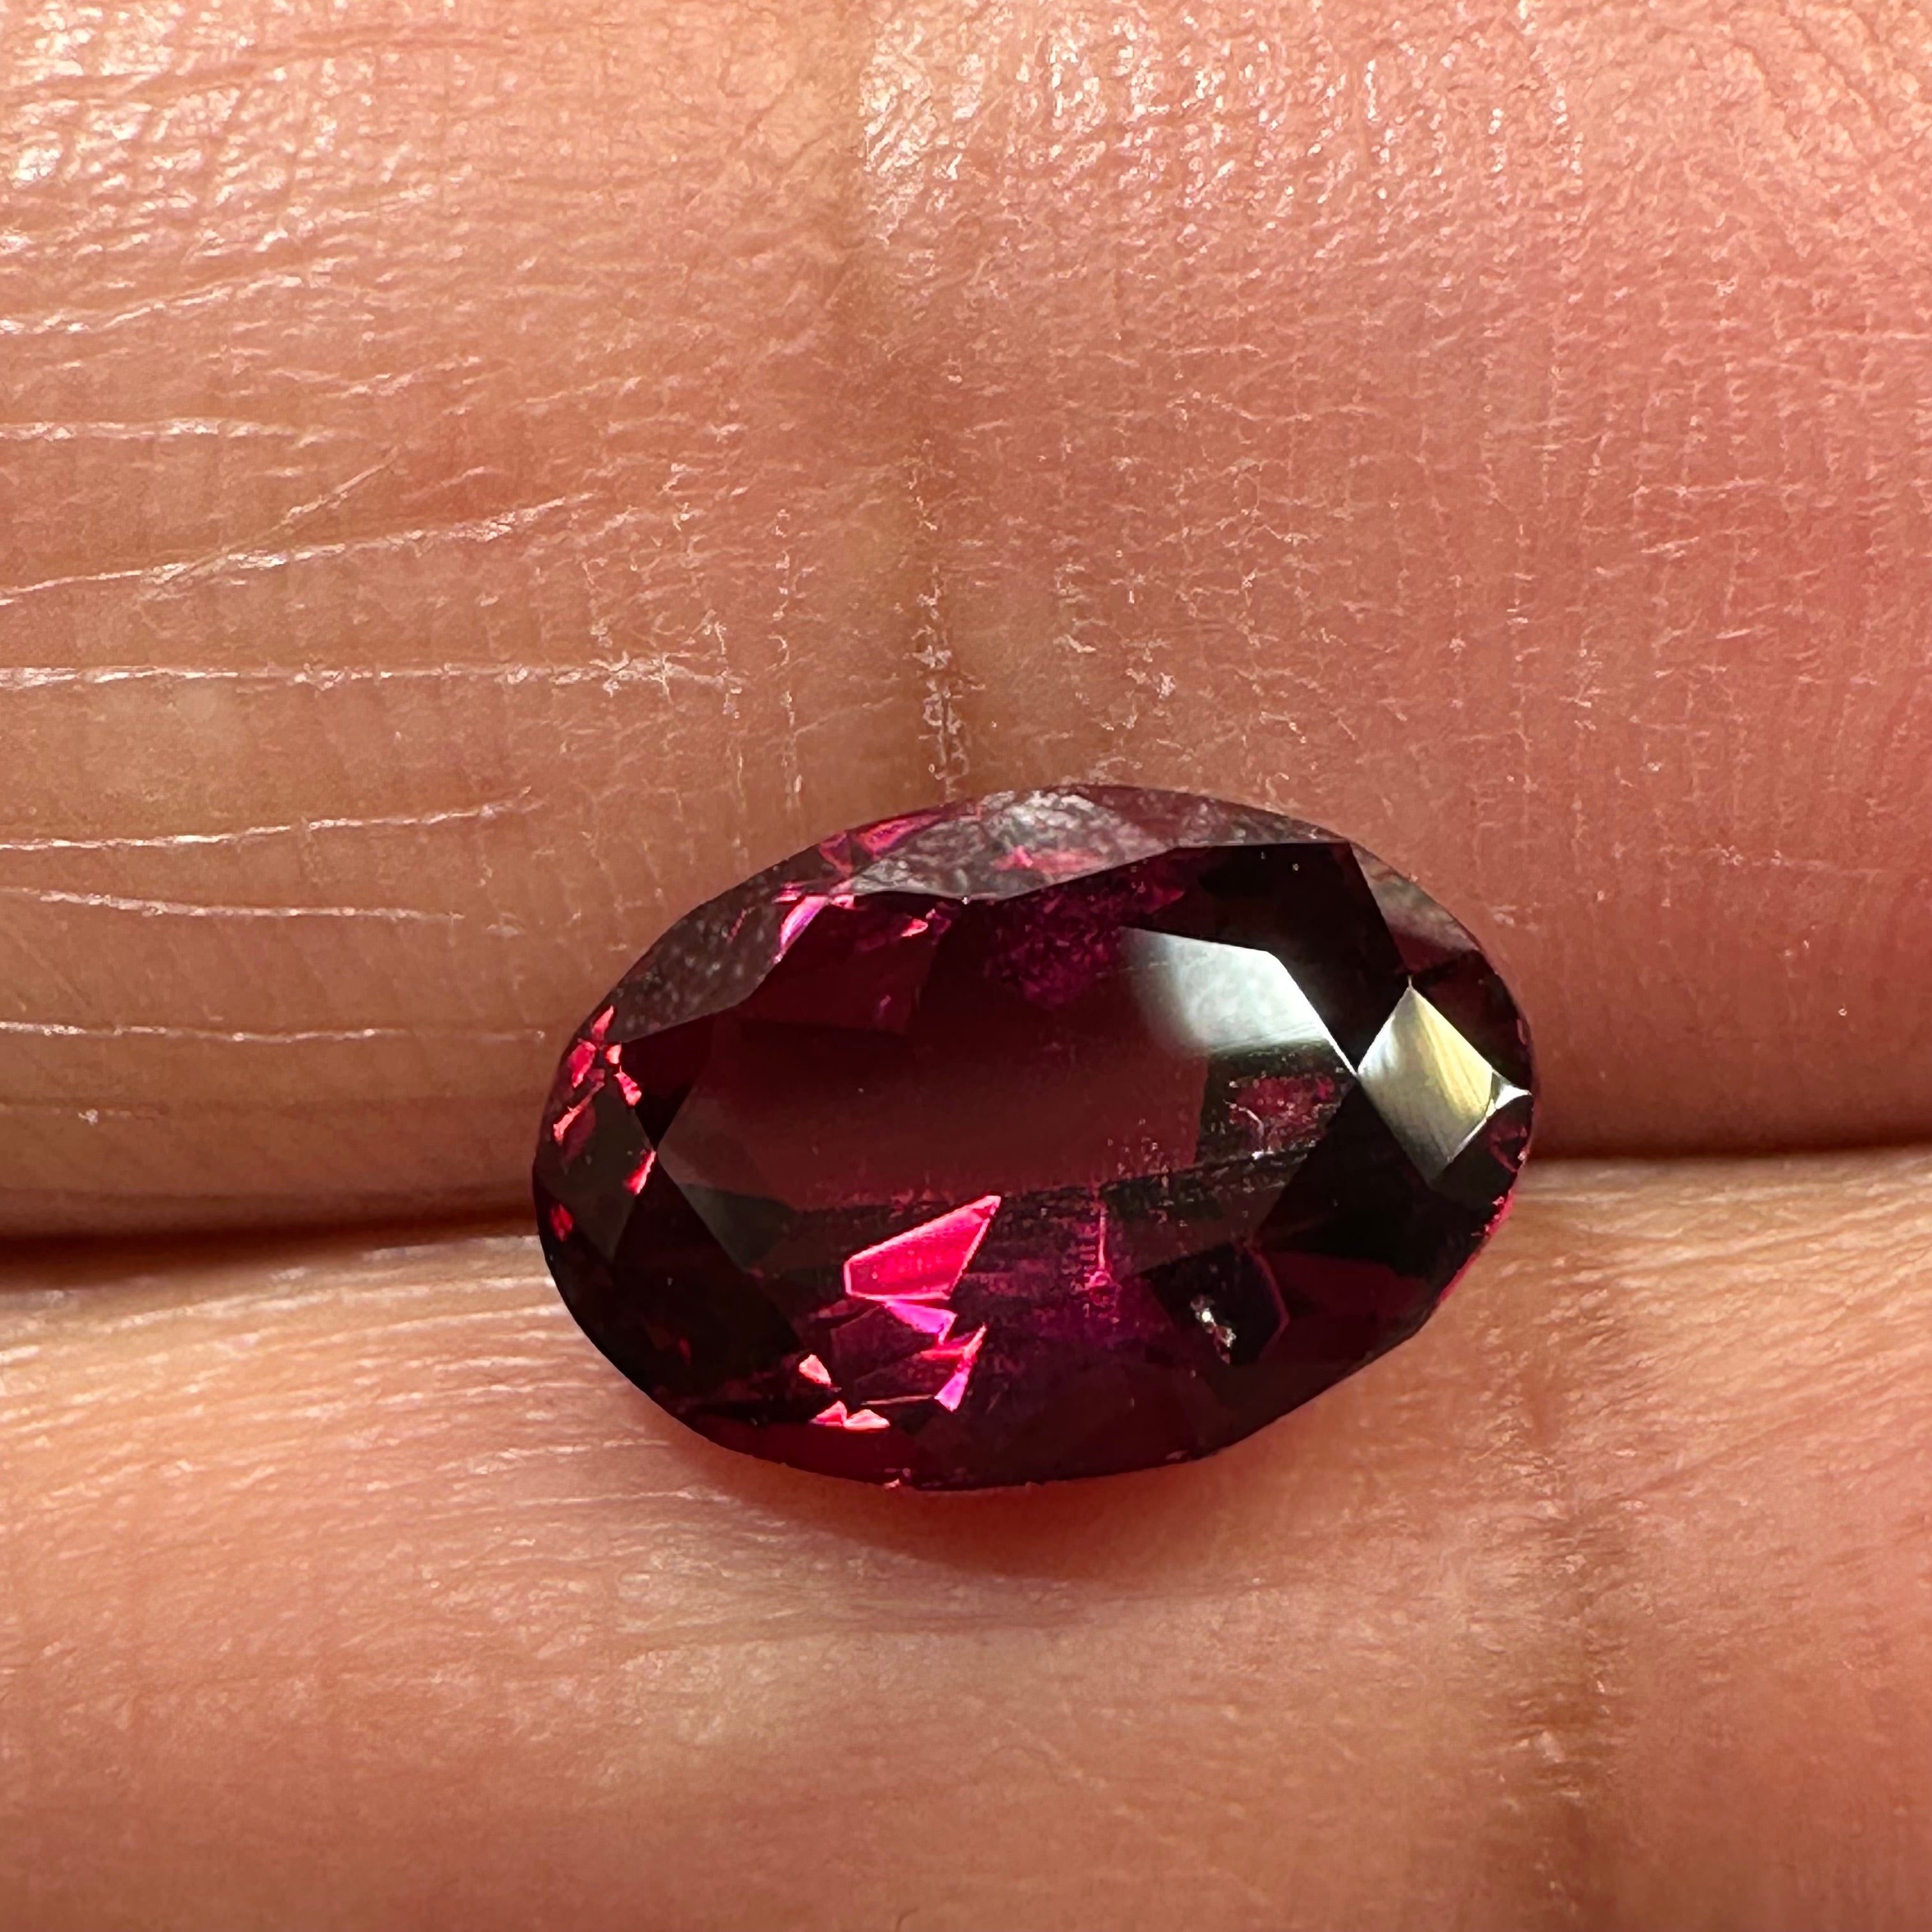 2.78ct Rose Garnet, Tanzania. Untreated Unheated, slight incl under one of the crown facets